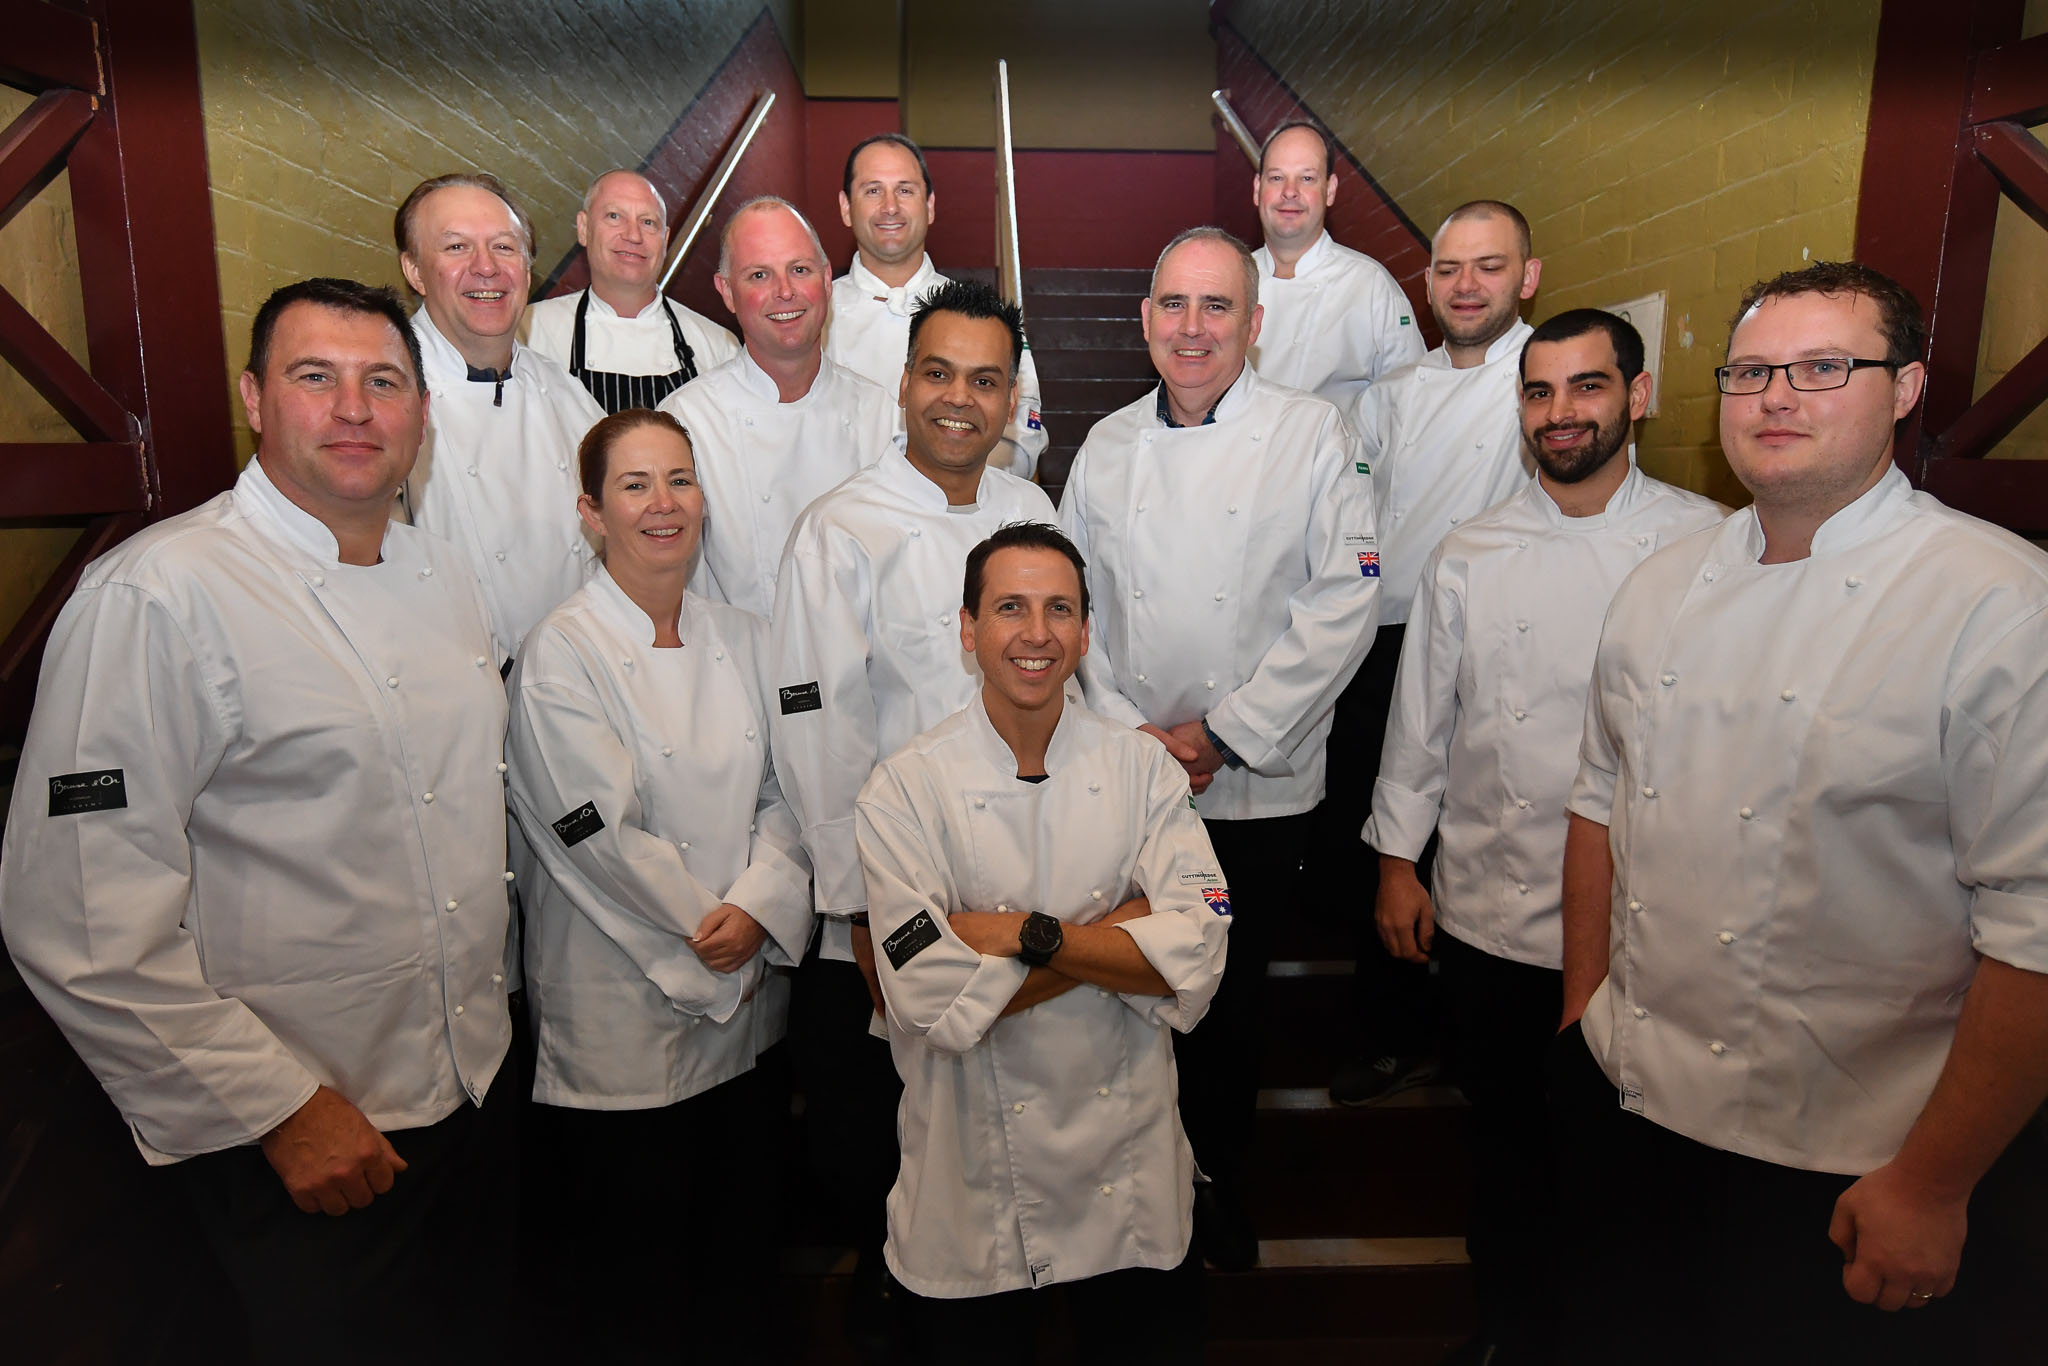 Melbourne, 30 May 2017 - The judges pose for a photograph at the Australian selection trials of the Bocuse d'Or culinary competition held during the Food Service Australia show at the Royal Exhibition Building in Melbourne, Australia.  Mark Agius from the William Angliss Institute a judge of the fish plate
Donovan Cooke from The Atlantic Restaurant a judge of the fish plate
Alexander McIntosh from At The Heads a judge of the fish plate
Andre Smaniotto from the Geelong Cats a judge of the fish plate
Simon Cosentino former Commis competitor Bocuse d’Or 2007-9 a judge of the meat plate
Florent Gerardin from the Newmarket Hotel a judge of the meat plate
Deepak Mishra from The Langham Hotel a judge of the meat plate
Mark Weatherley from Les Toques Blanches a judge of the meat plate
Karen Doyle from Le Cordon Bleu kitchen invigilator judge
Glenn Flood from the ALH Group kitchen invigilator judge
John McFadden from the Parkroyal Hotel Darling Harbour kitchen invigilator judge
Head judge Philippe Mouchel from the Philippe Restaurant kitchen invigilator judge
Tom Milligan of the Bocuse d'Or Academy AustraliaPhoto Sydney Low